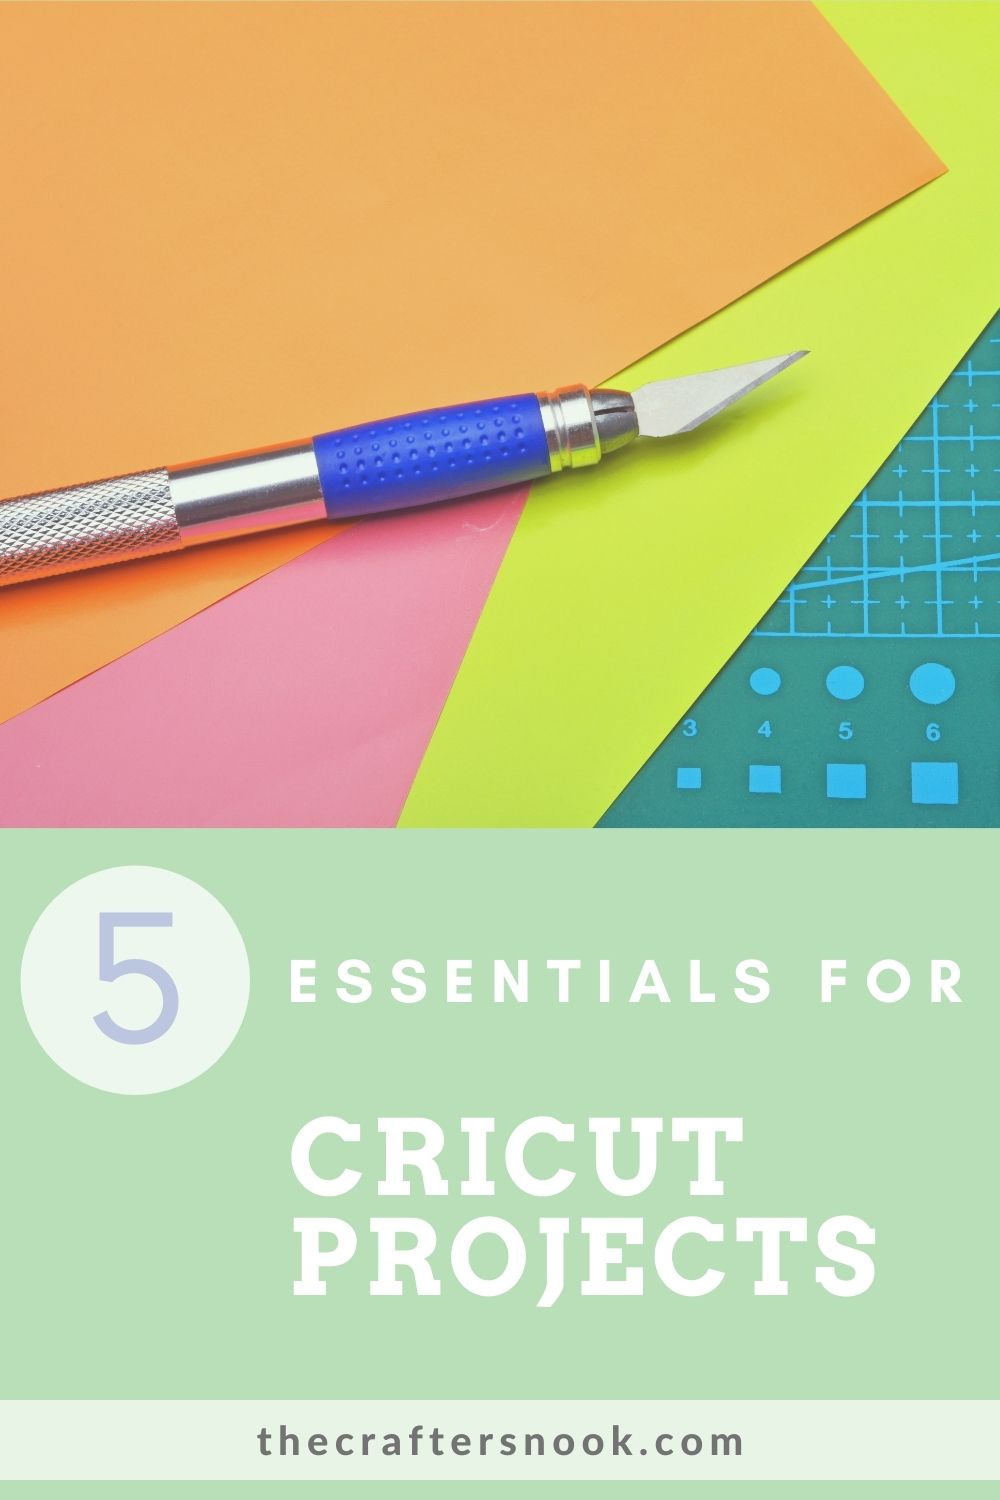 Cricut Essentials: 5 Things You Need to Start Creating - The